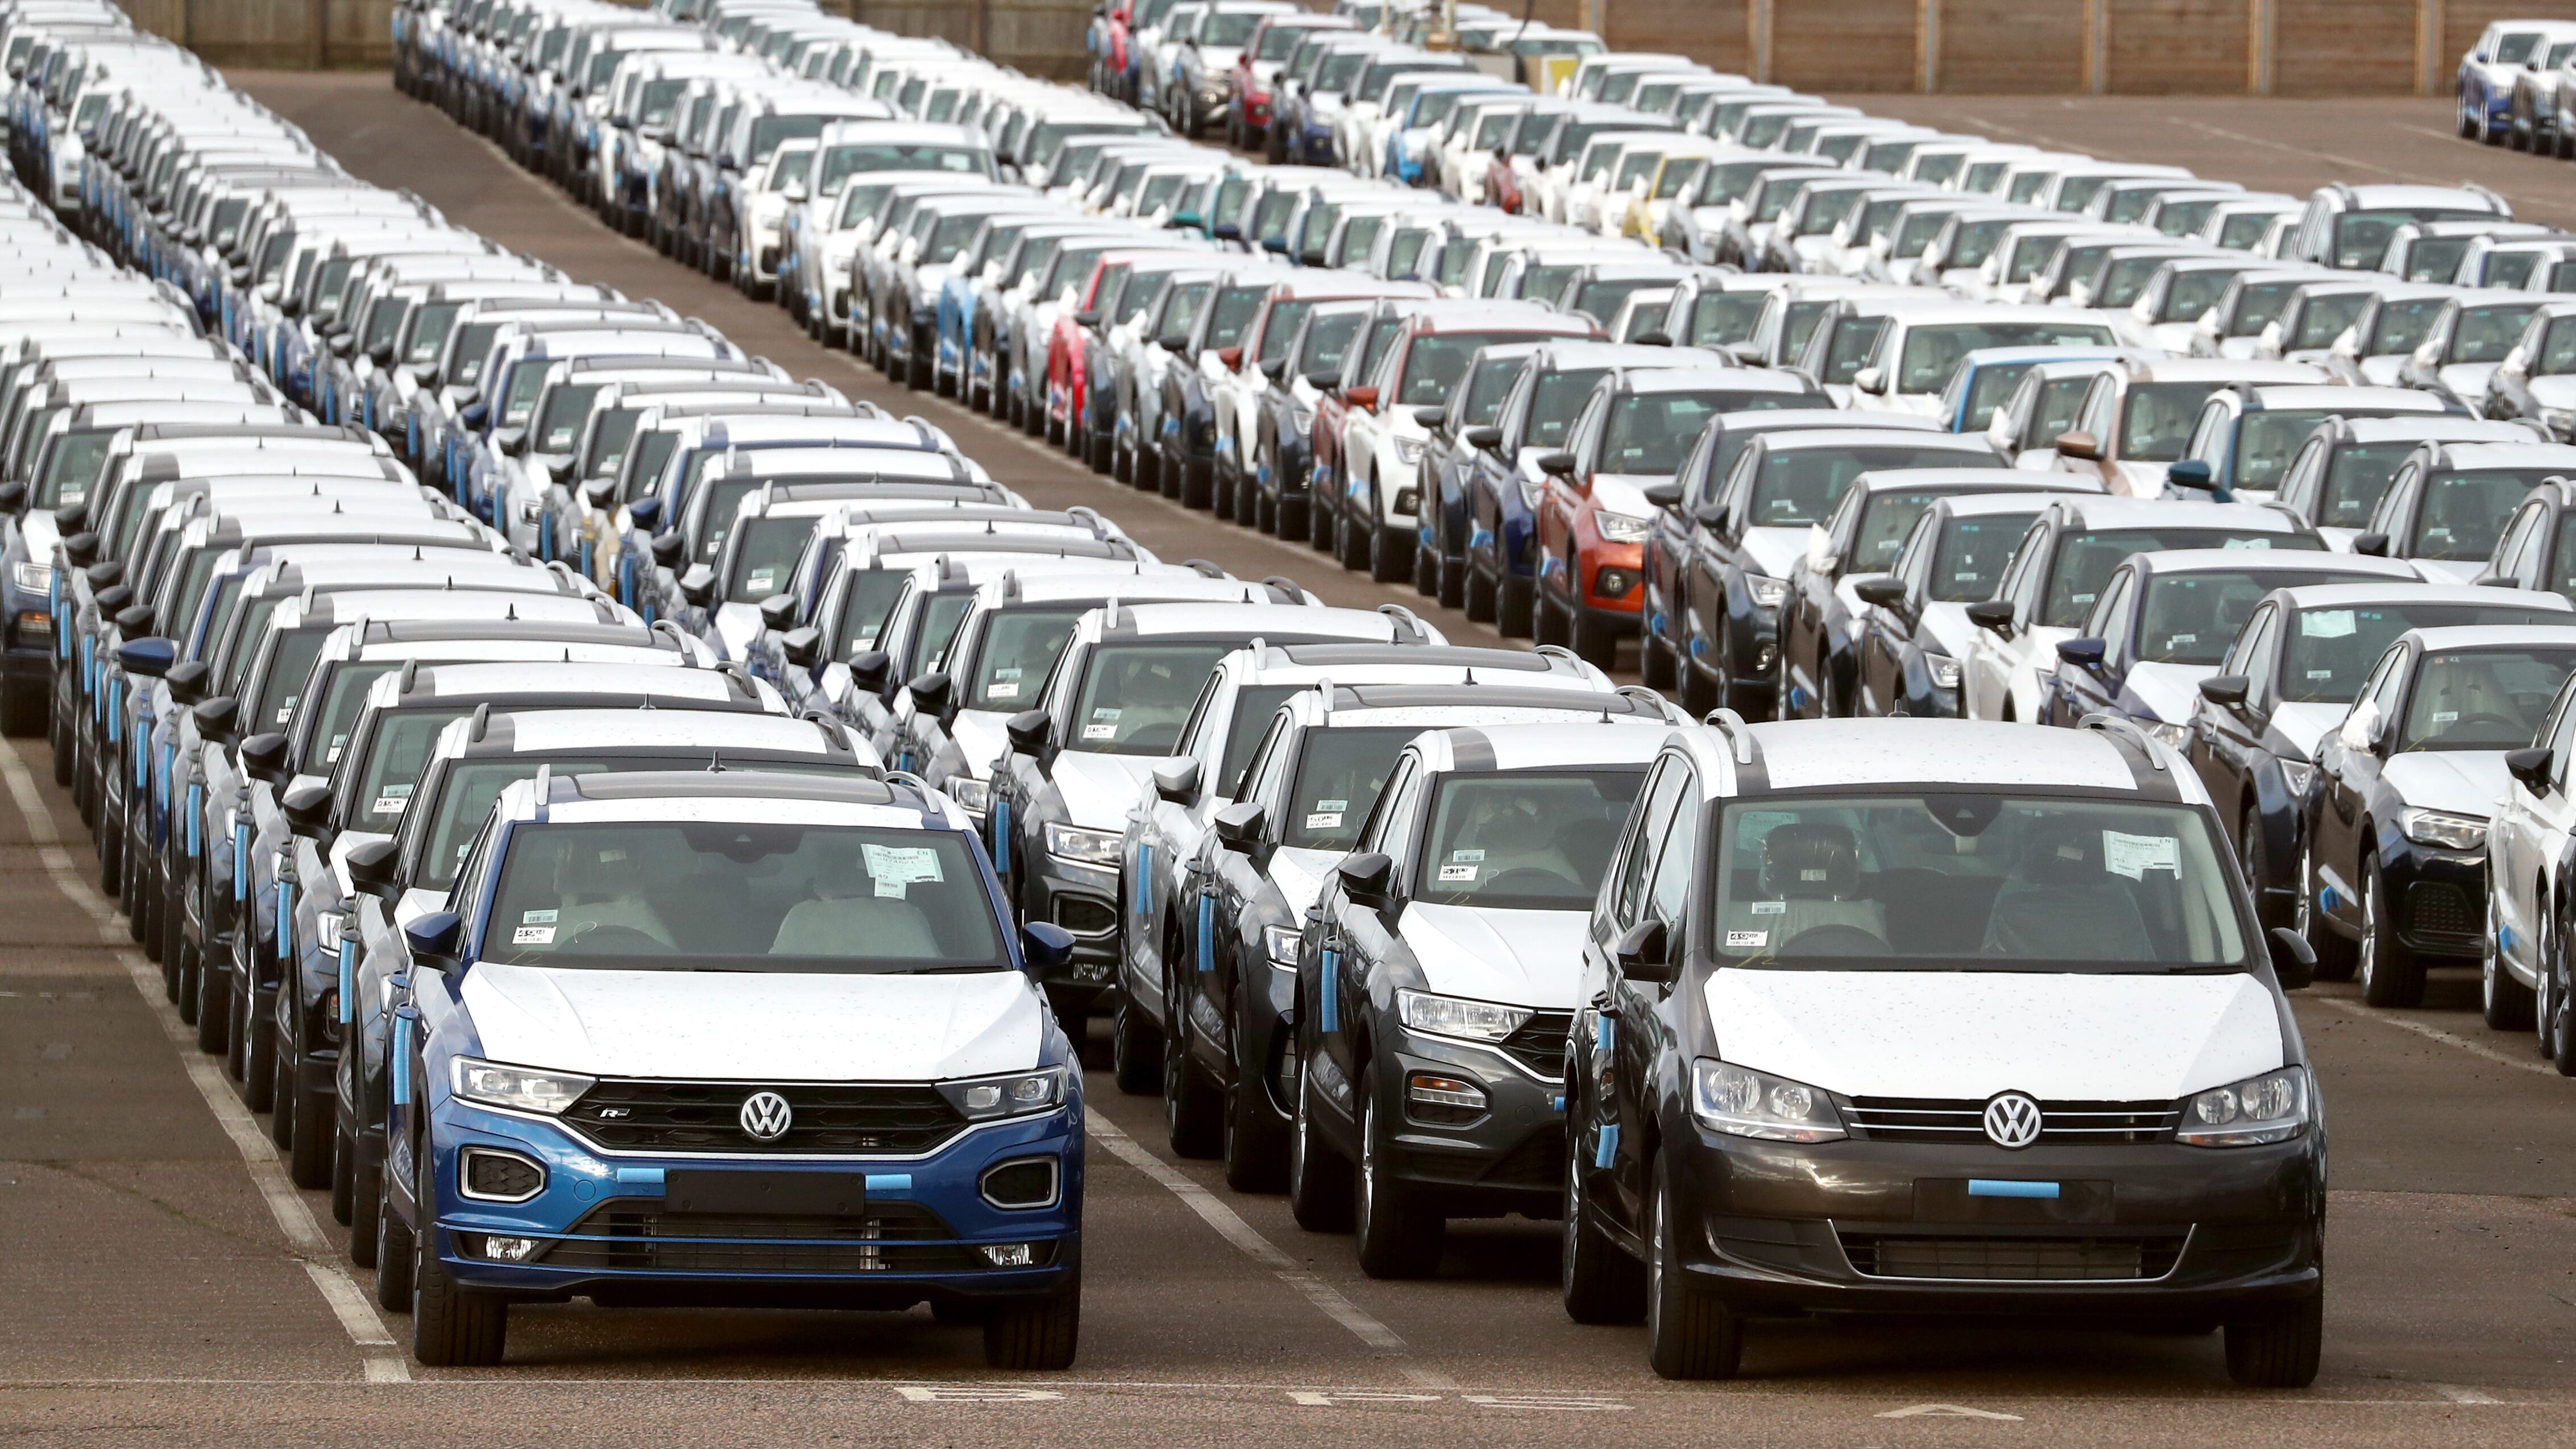 The SMMT said 67,625 new cars were registered by private consumers in June